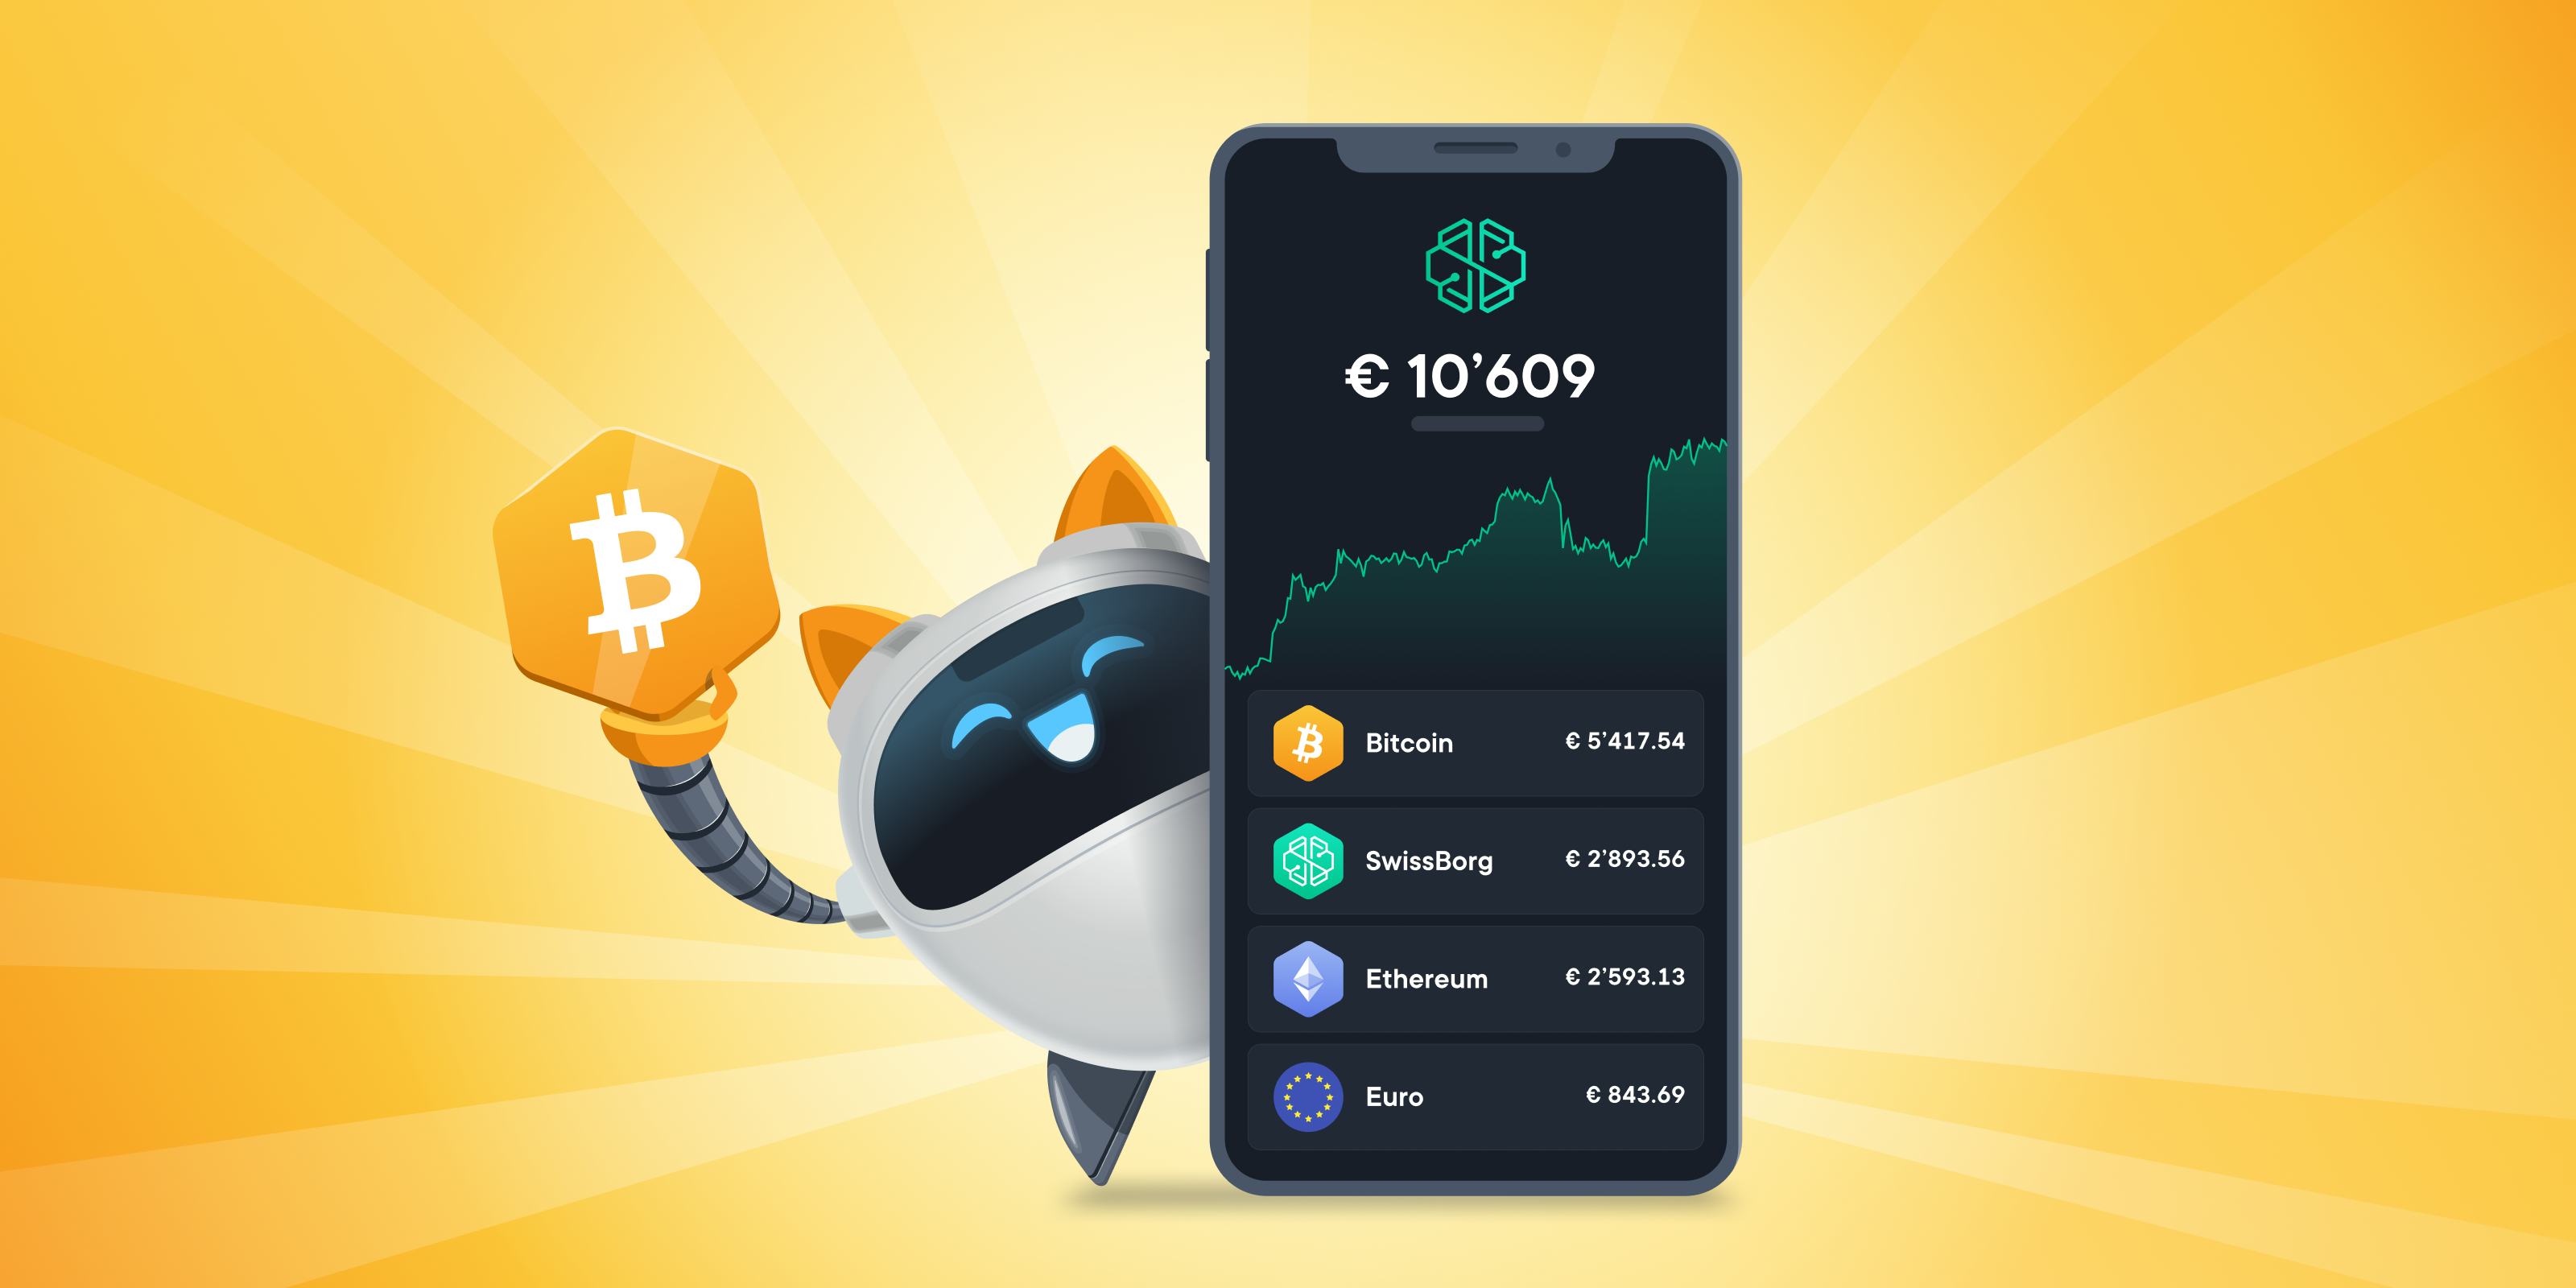 Rewards from the Crypto Challenge app on Android and iOS